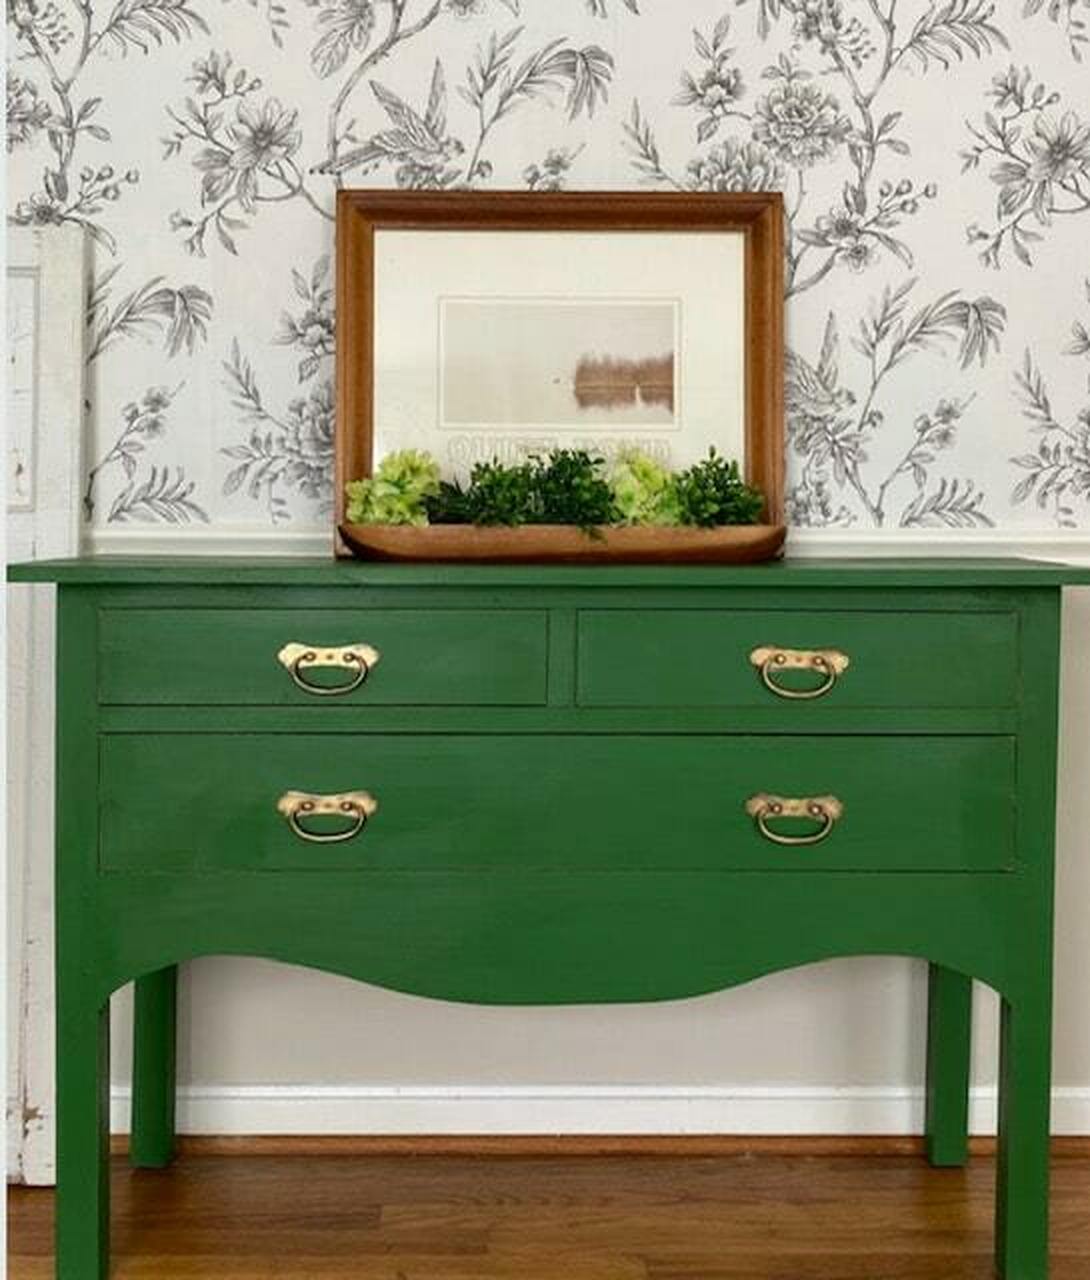 Evergreen Dixie Belle Chalk Mineral Paint - Same Day Shipping - No VOC - Chalk Paint for Furniture and Cabinets - Water Based Paint - belleandbeau850